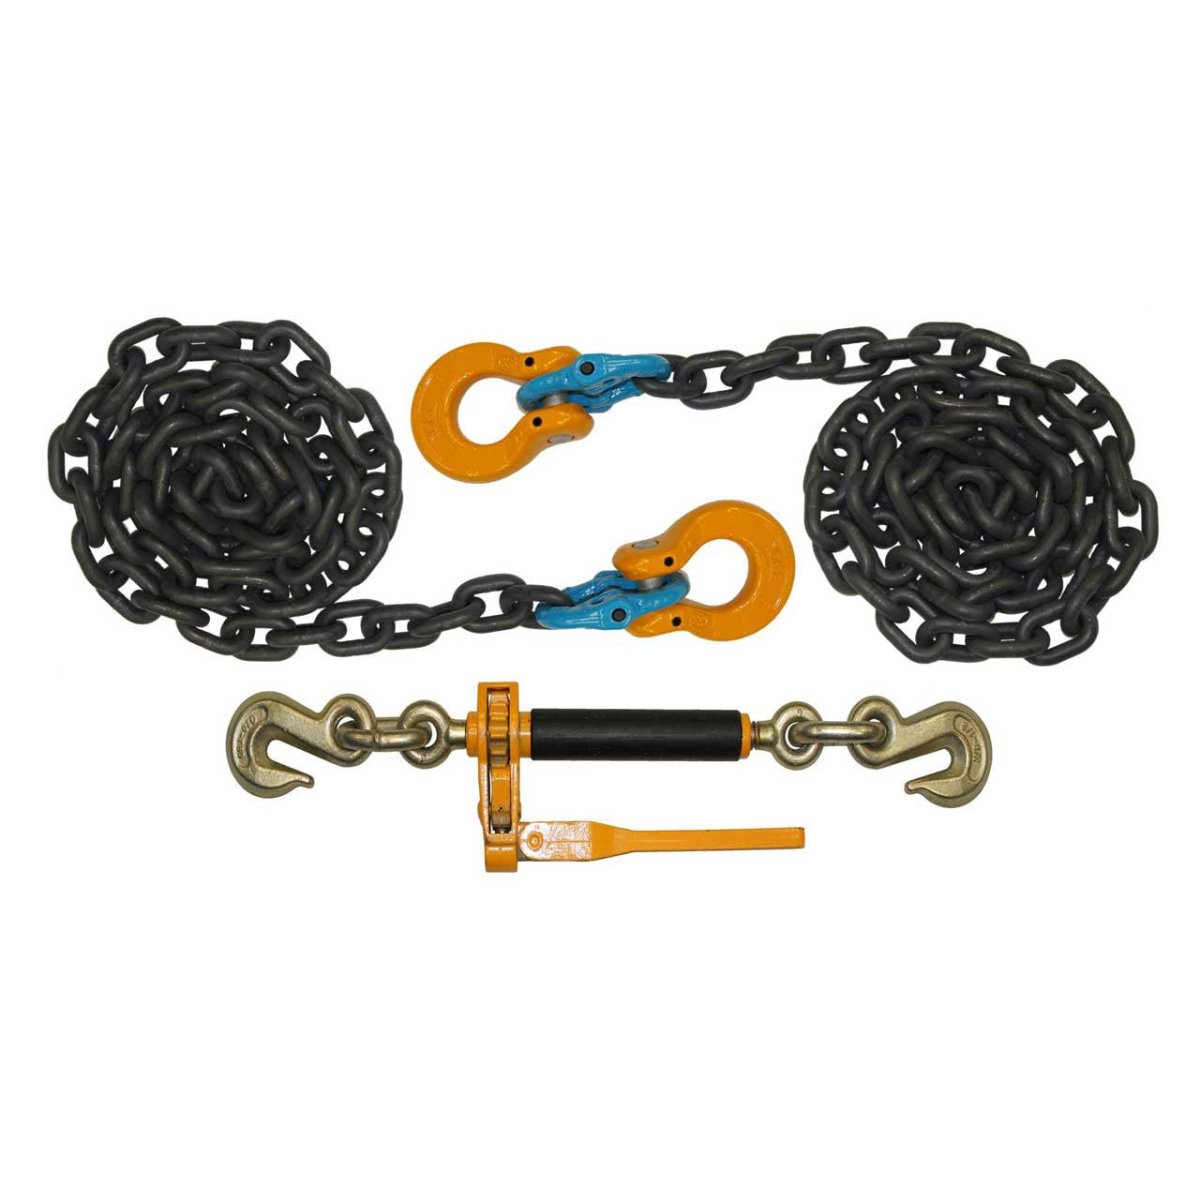 B/A Products Co. Grade 100 Axle Chain Kit w/Omega Link - starequipmentsales